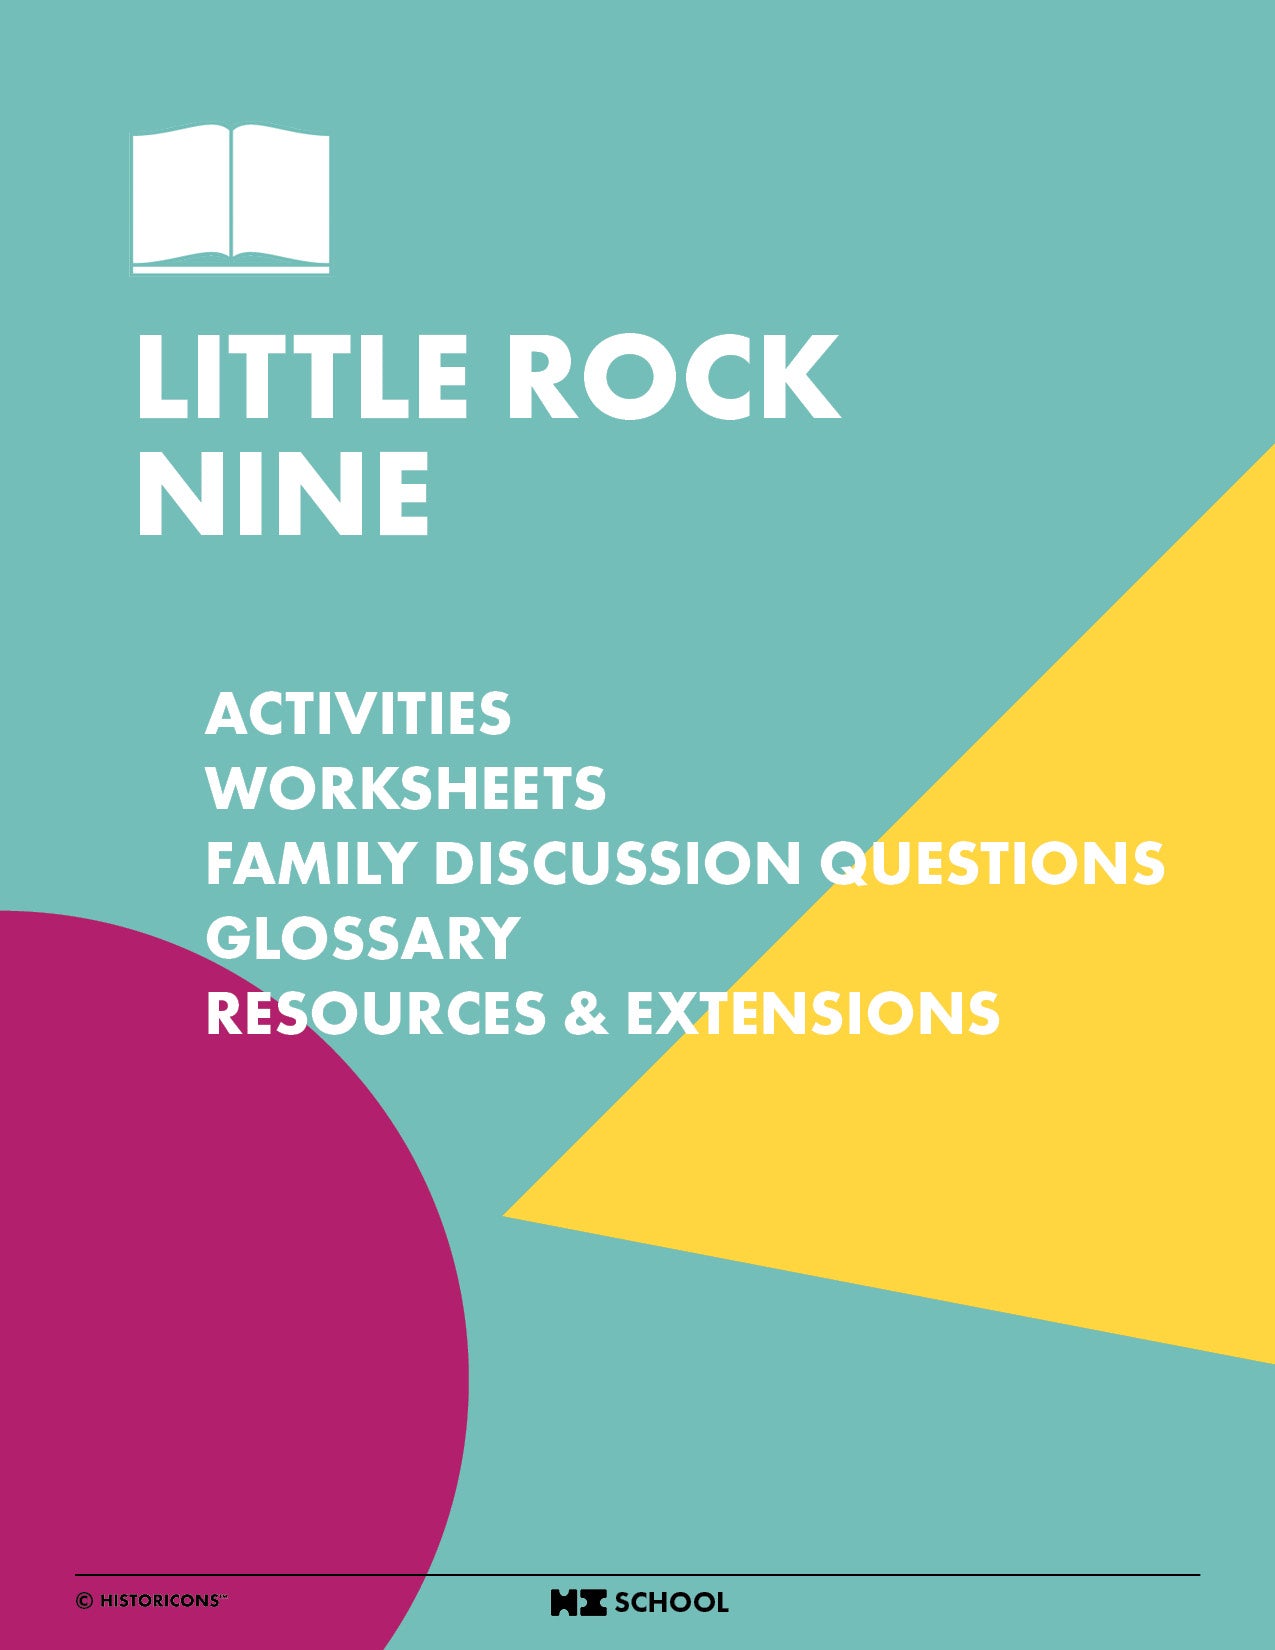 A colorful teal, yellow, and magenta cover photo of the HI School Little Rock Nine Activity Pack is displayed, which shows a table of contents for fun diversity activities, Worksheets, Family Discussion Questions, Glossary, and Resources & Extensions to put allyship in action and teach Black History to kids.